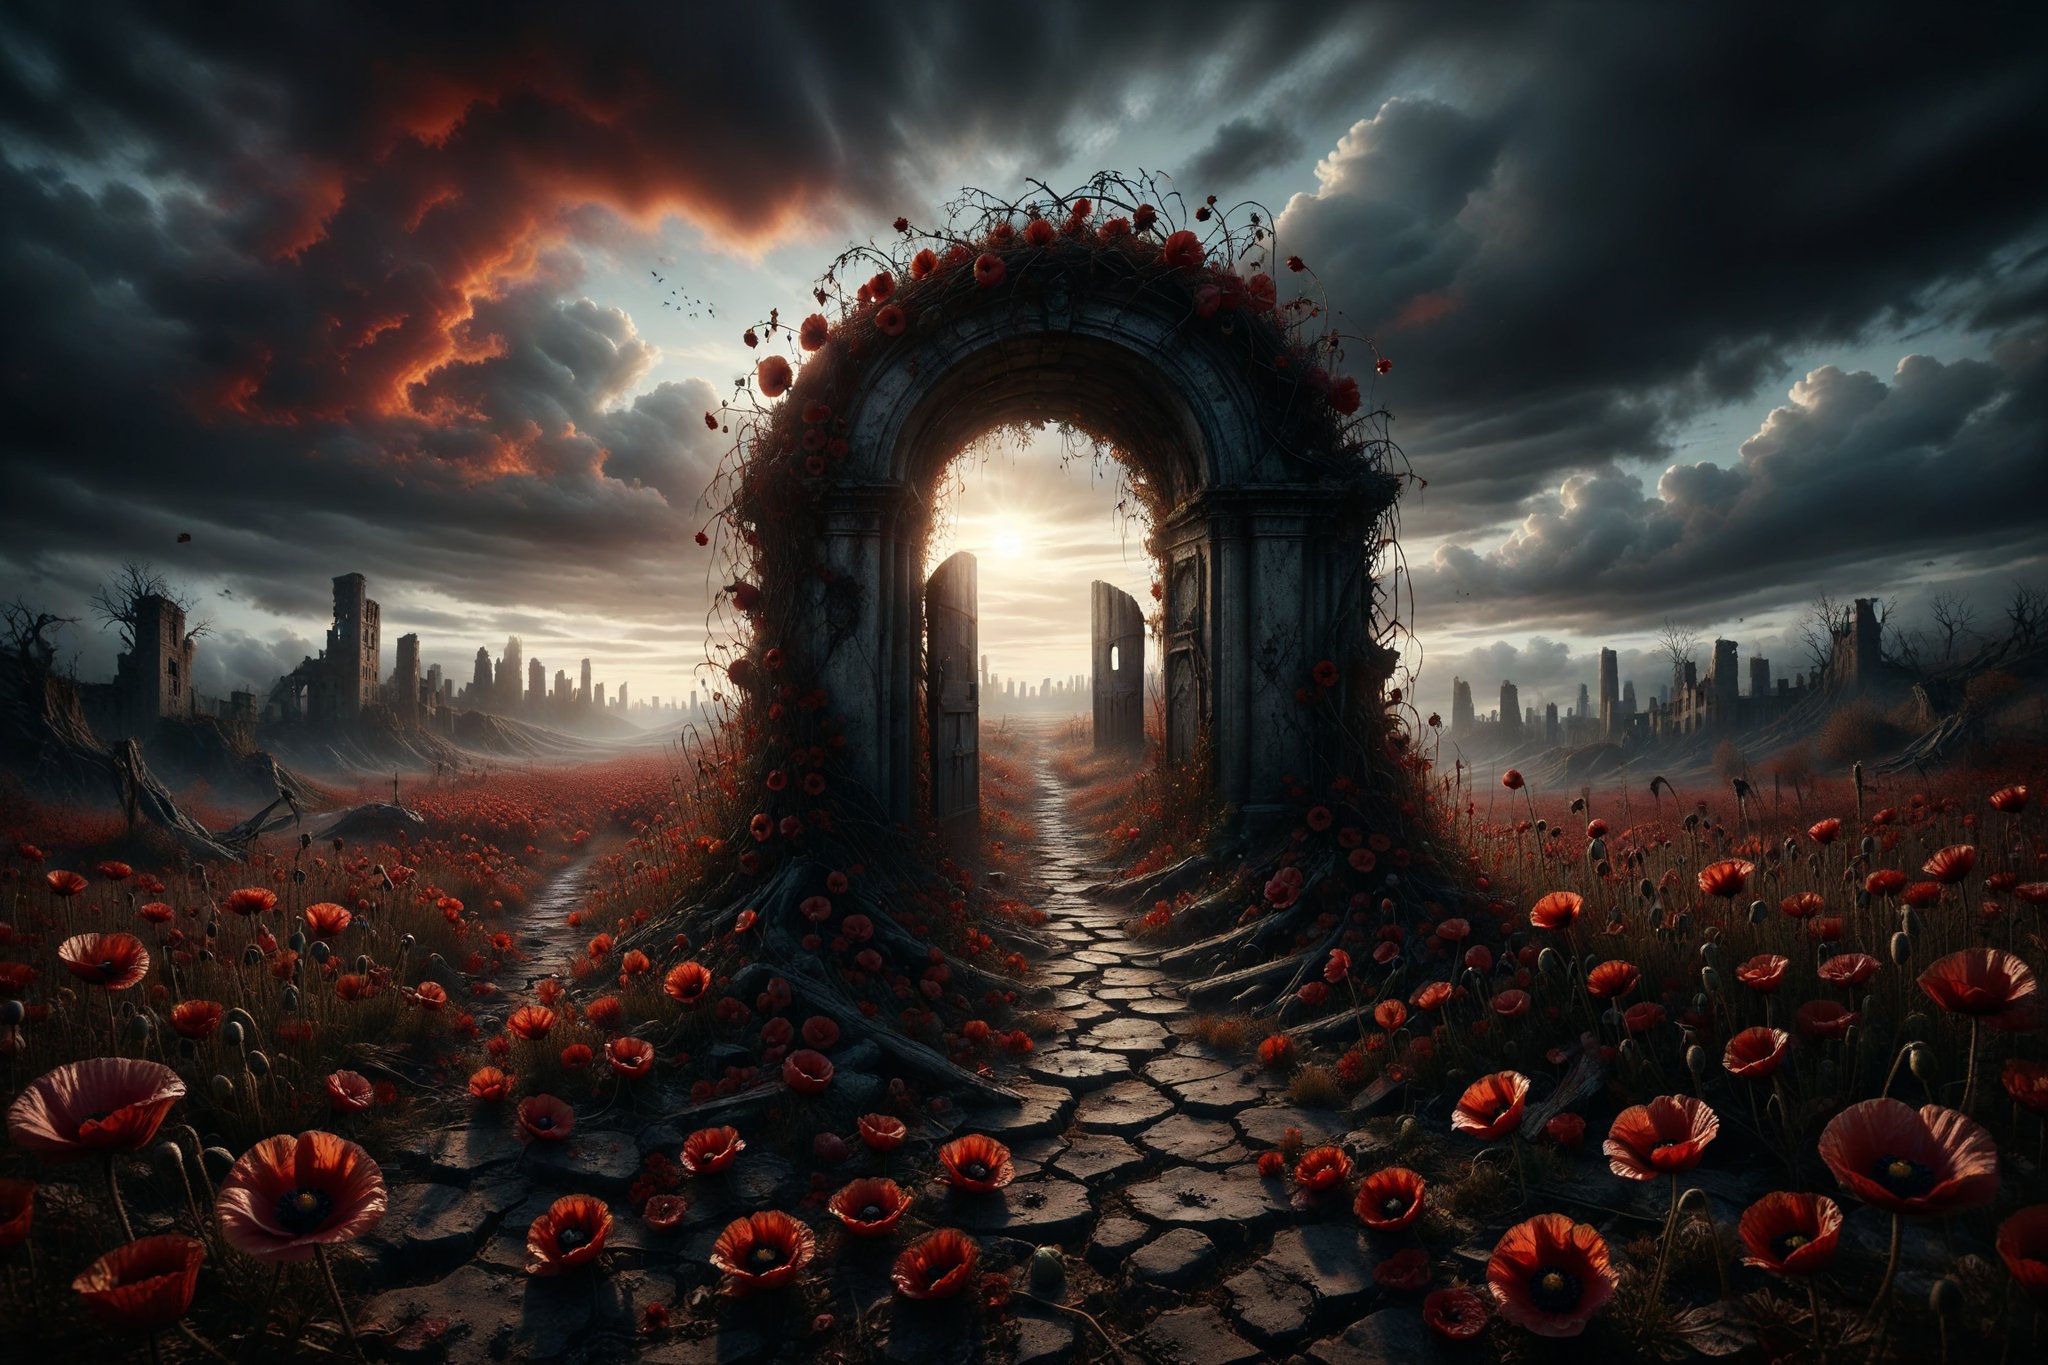 A dark, undulating portal amidst a field of withered poppies, with shadows creeping from the other side as the sky is dyed deep red.